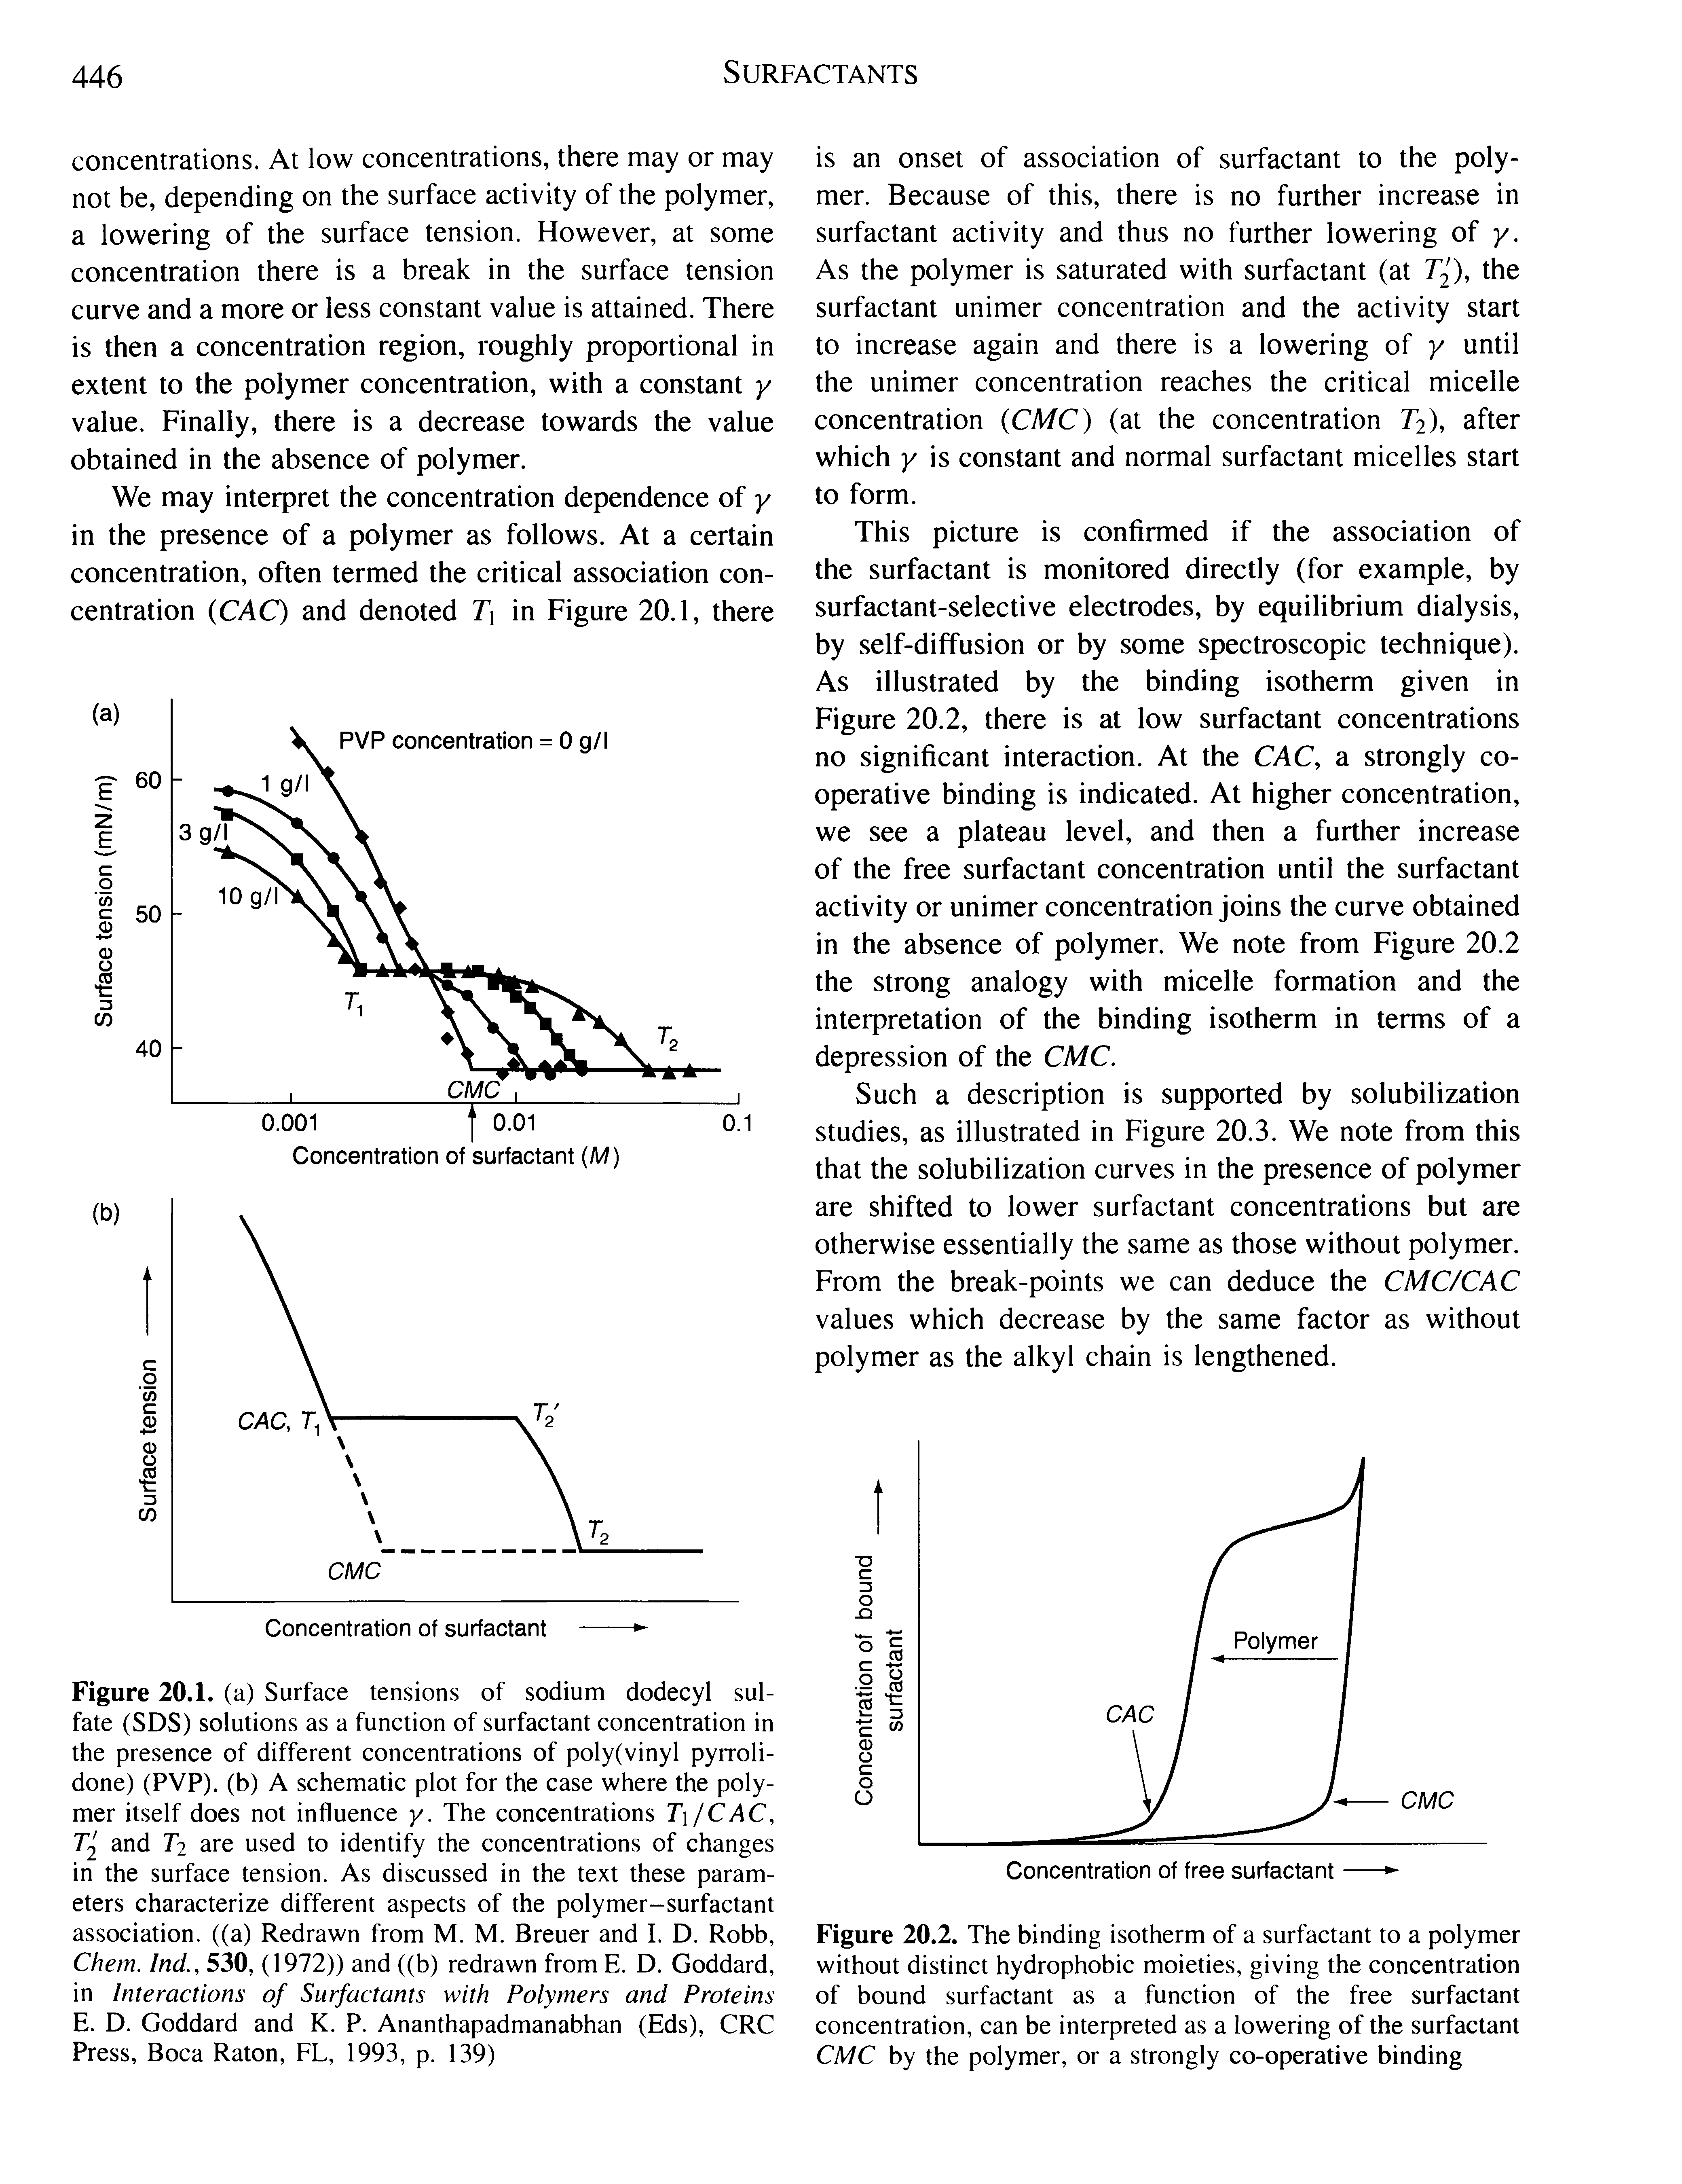 Figure 20.2. The binding isotherm of a surfactant to a polymer without distinct hydrophobic moieties, giving the concentration of bound surfactant as a function of the free surfactant concentration, can be interpreted as a lowering of the surfactant CMC by the polymer, or a strongly co-operative binding...